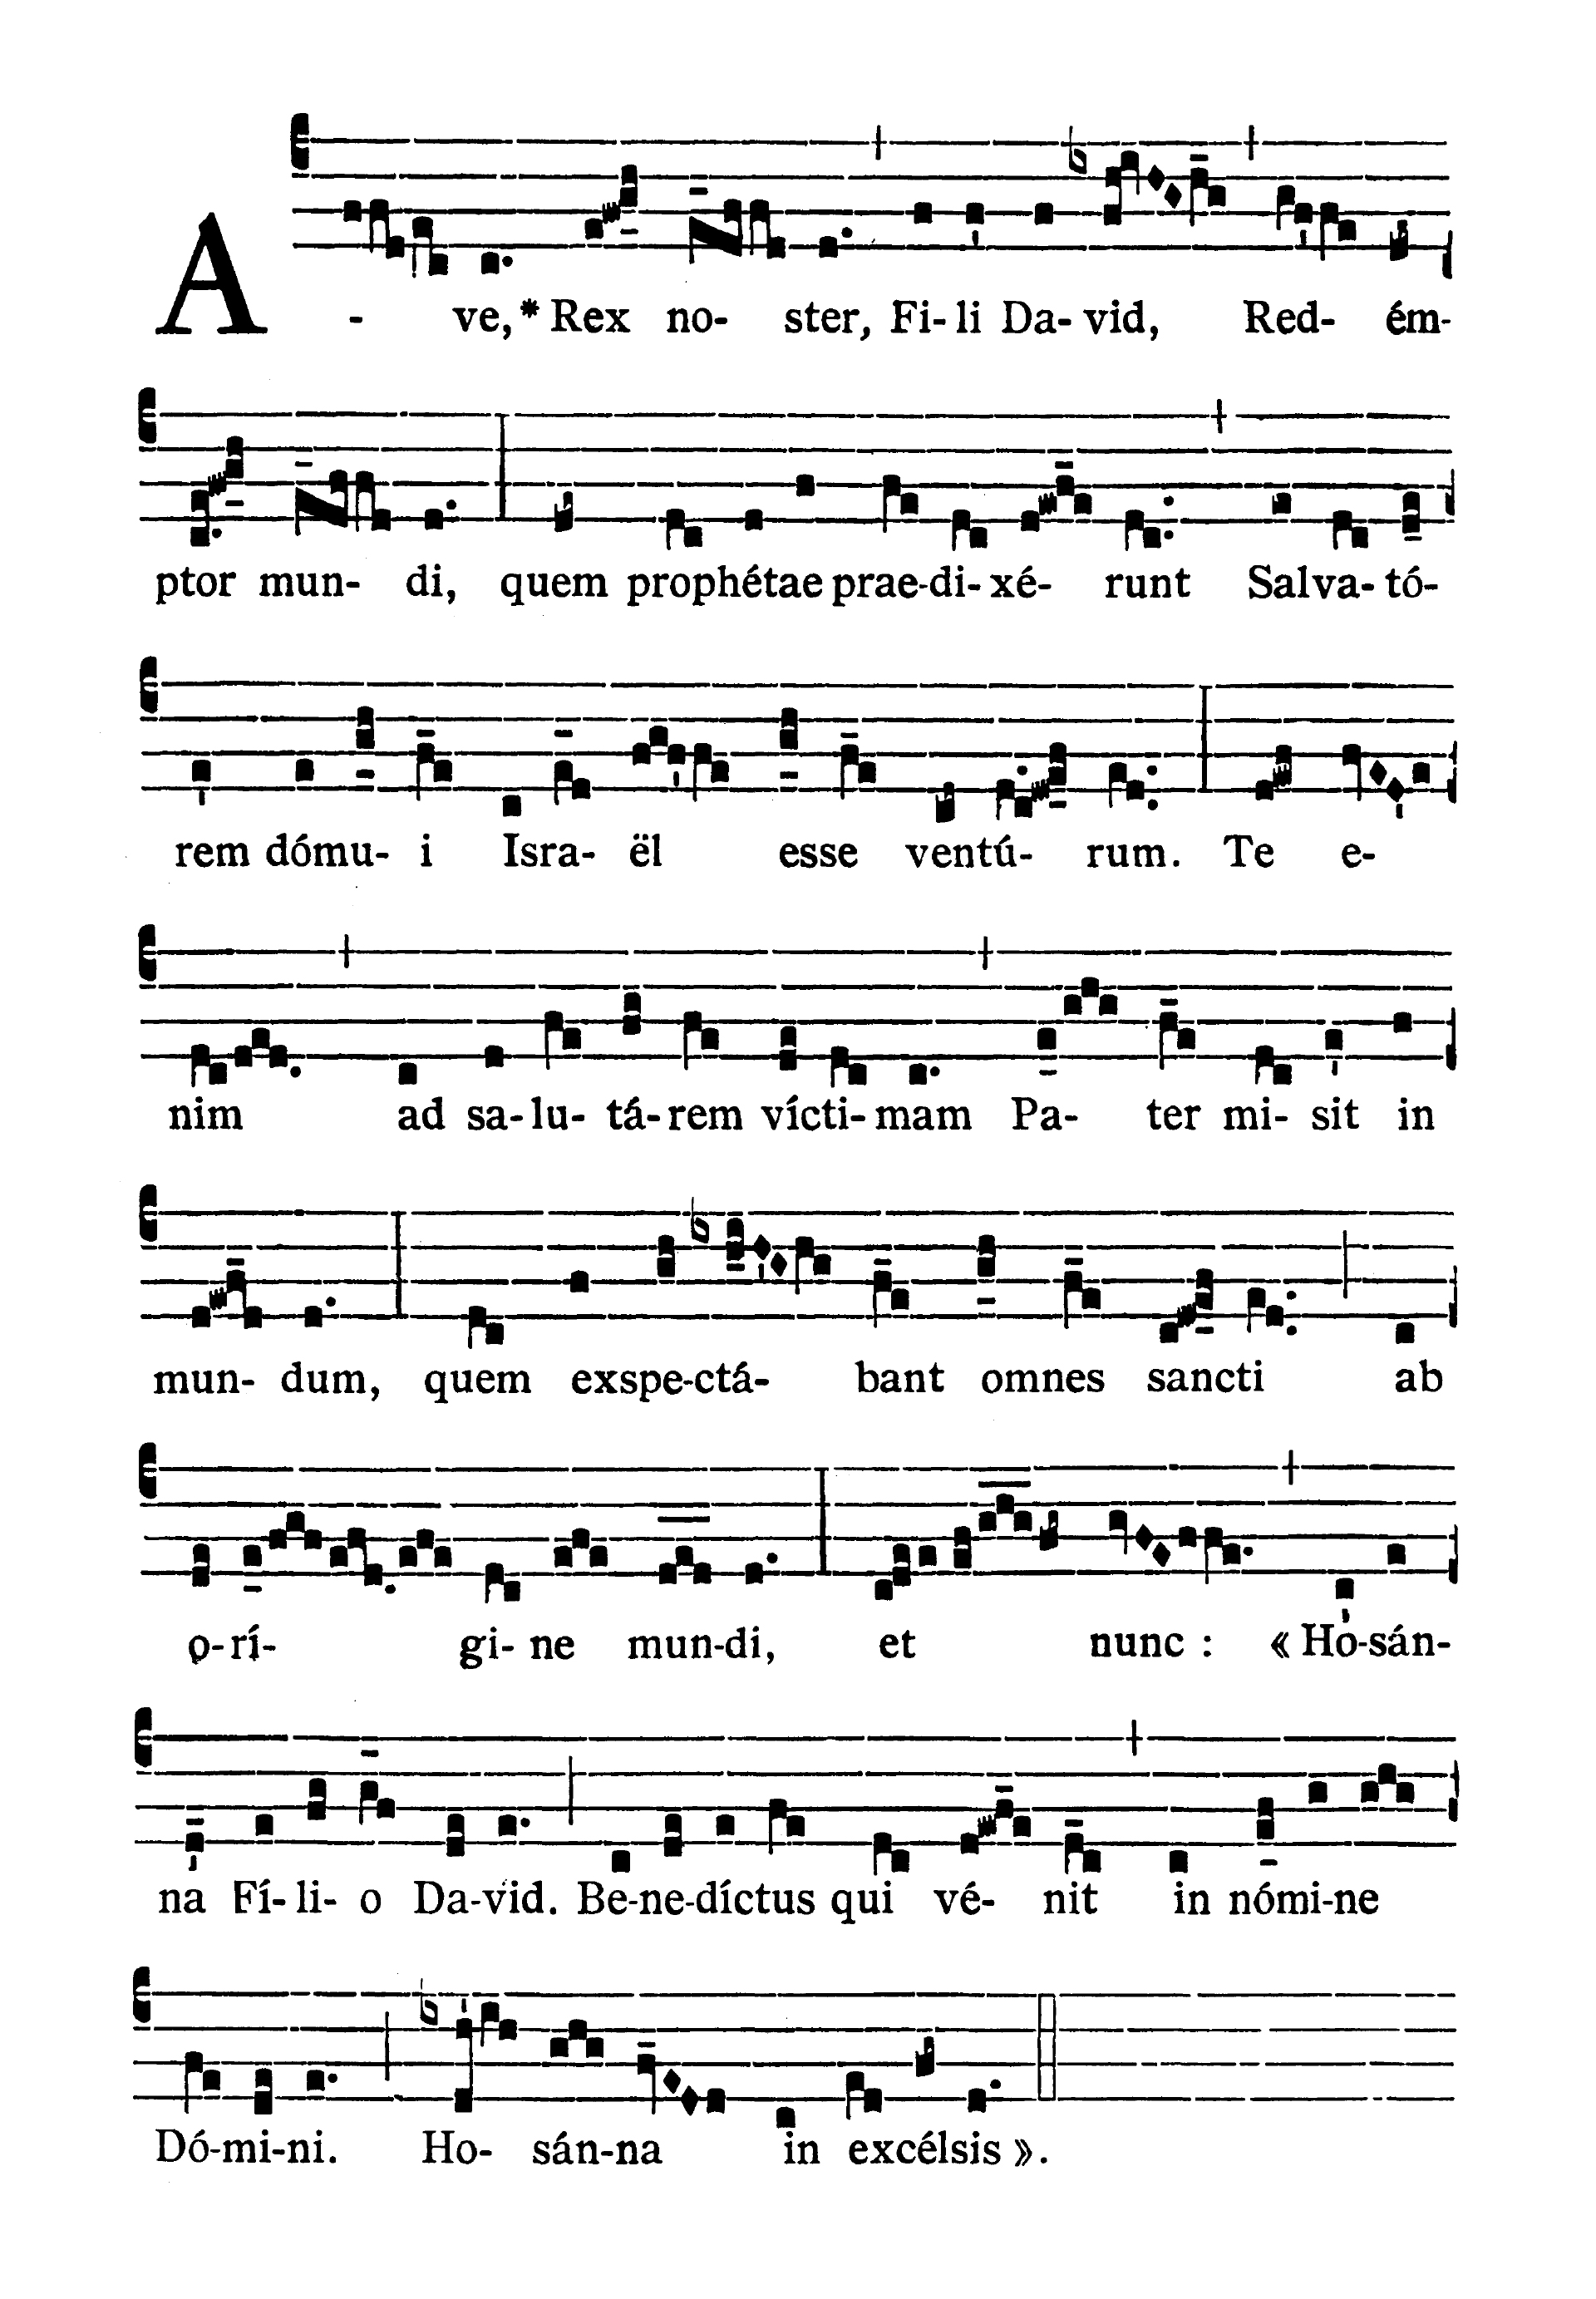 Dominica II in Passionis seu in Palmis (Palm Sunday) - Antiphona (Ave Rex noster)